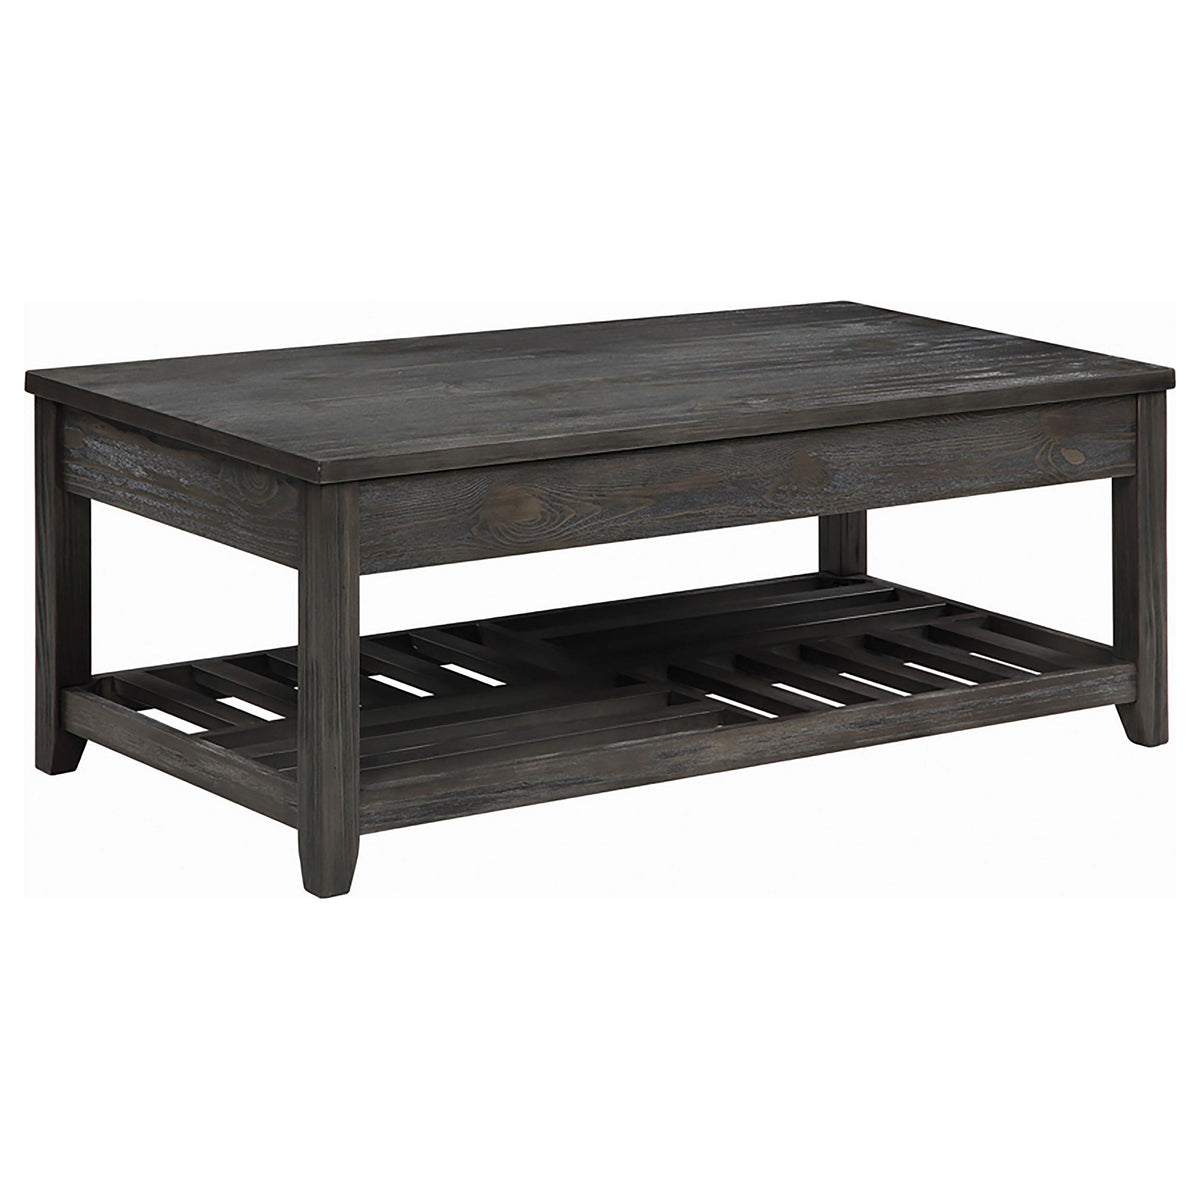 Cliffview Lift Top Coffee Table with Storage Cavities Grey Cliffview Lift Top Coffee Table with Storage Cavities Grey Half Price Furniture